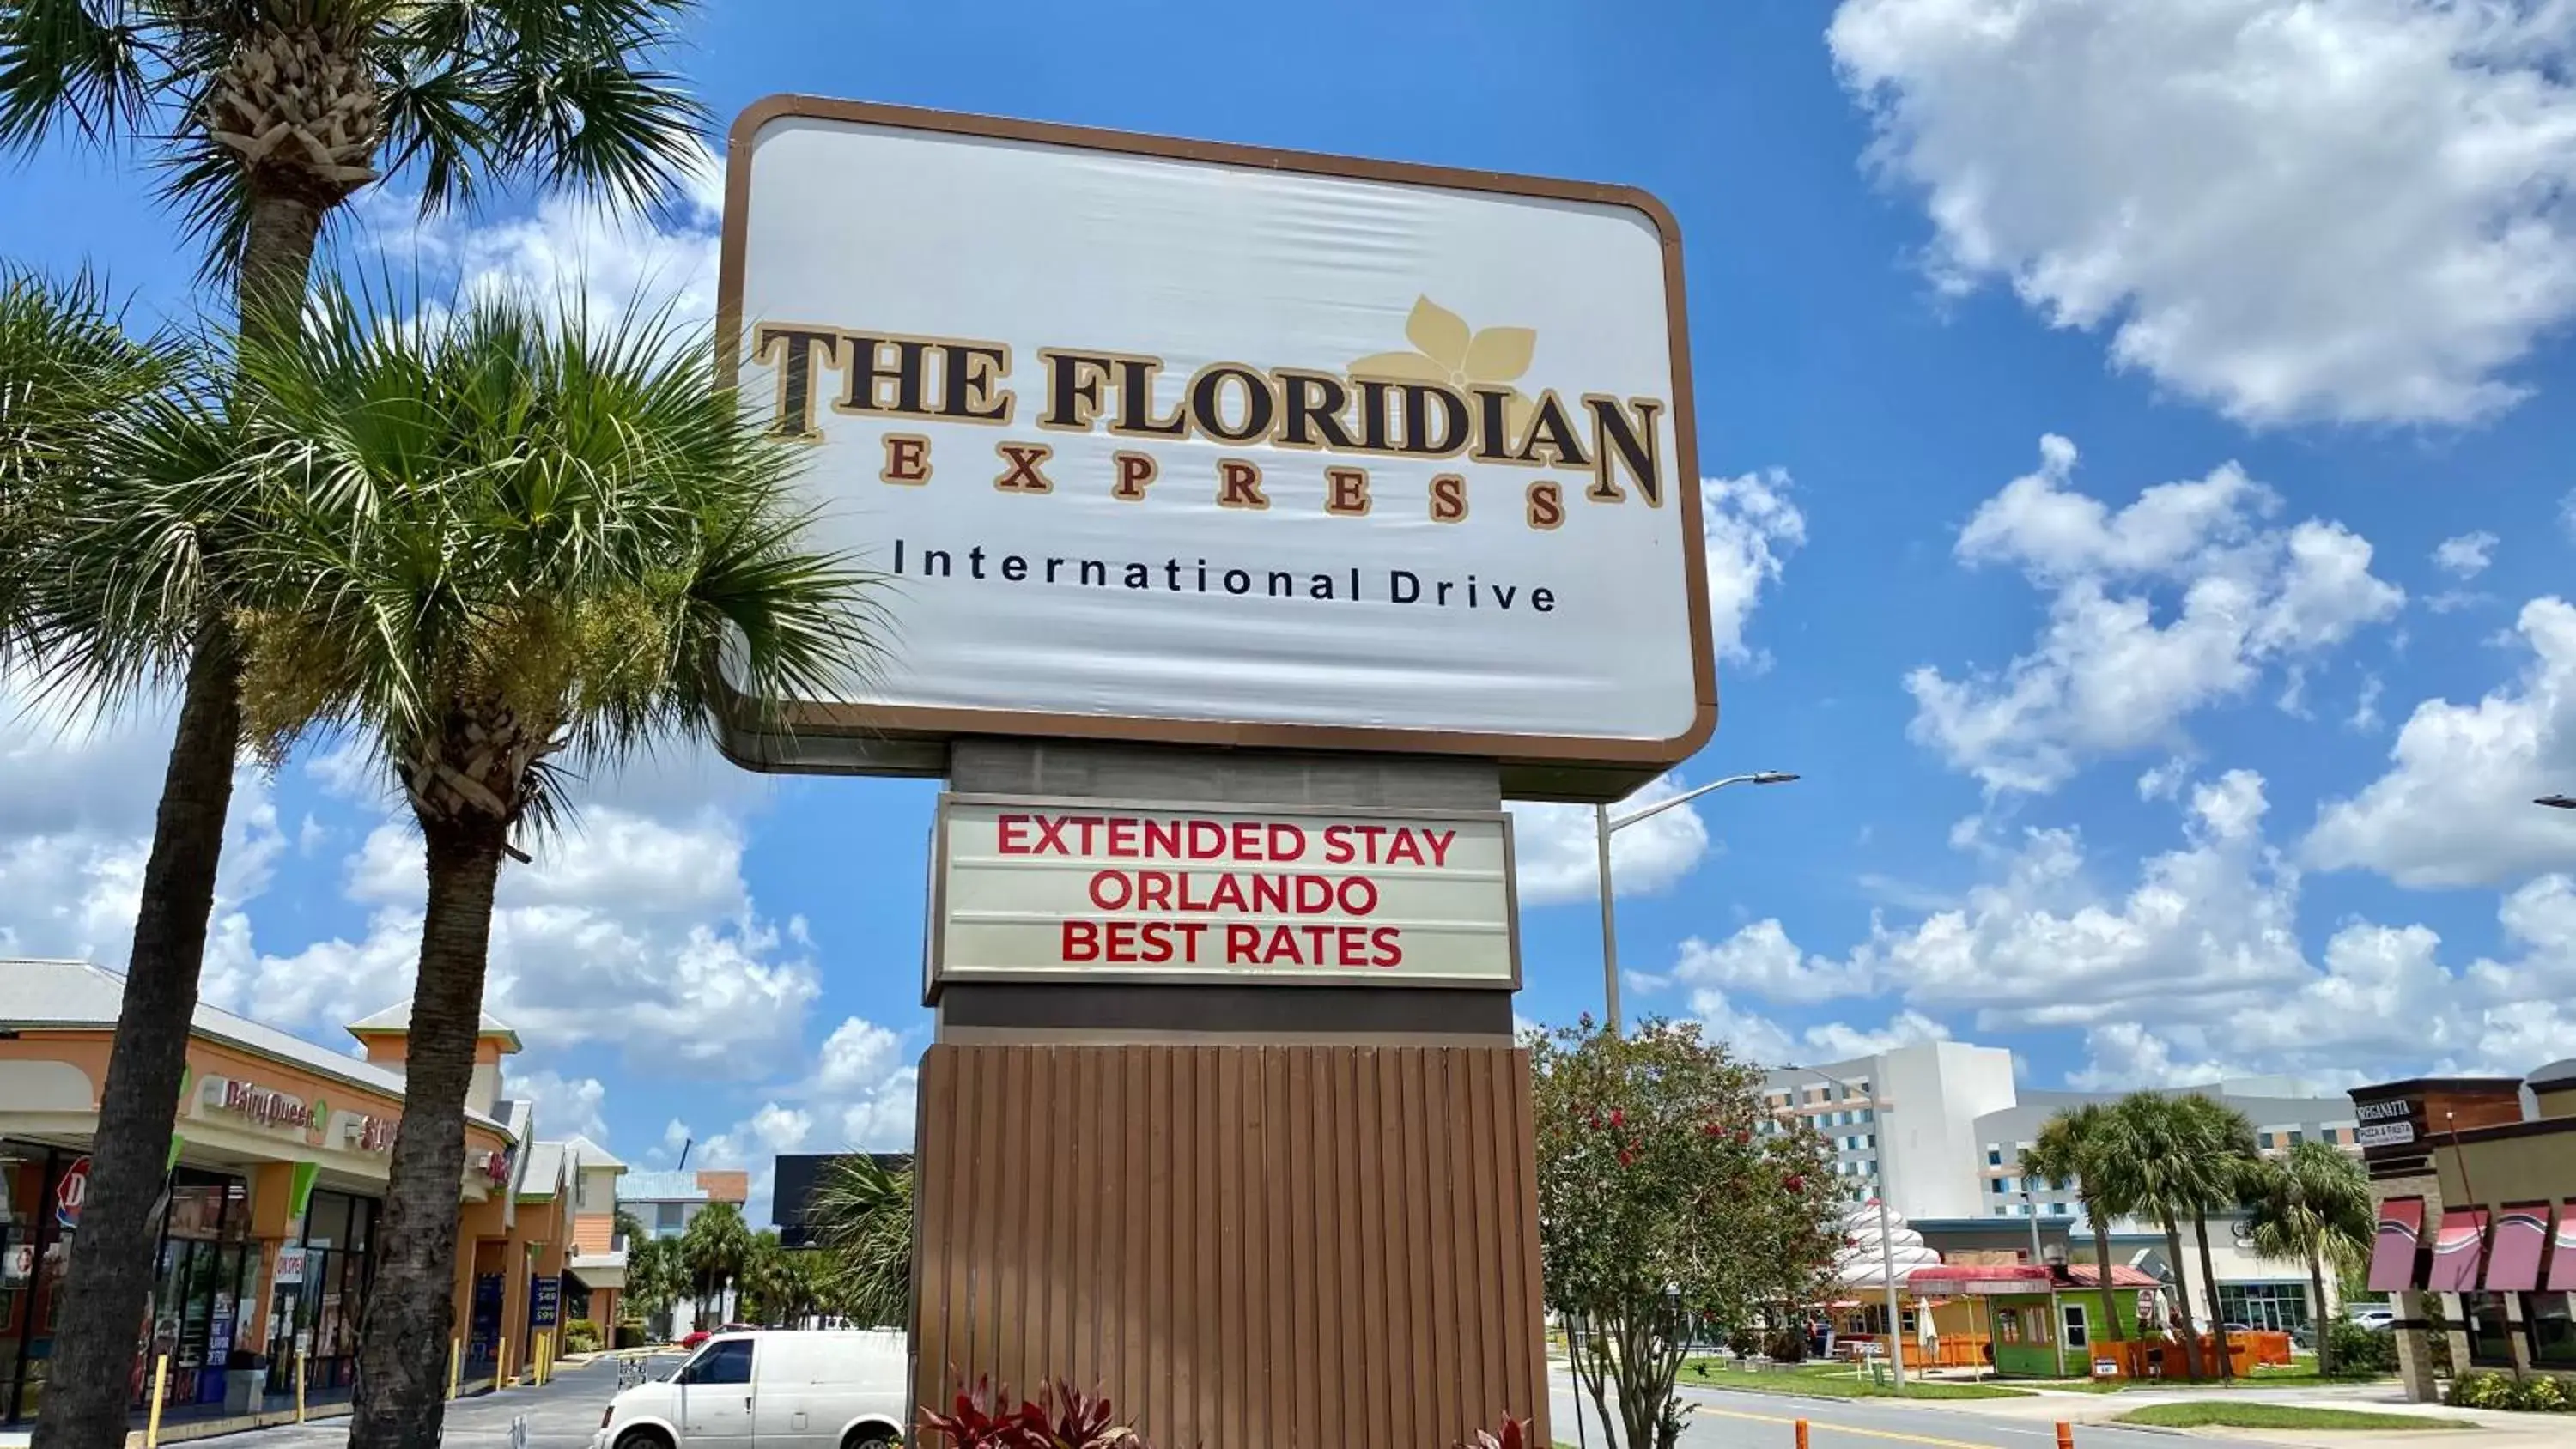 Property logo or sign in Floridian Express International Drive